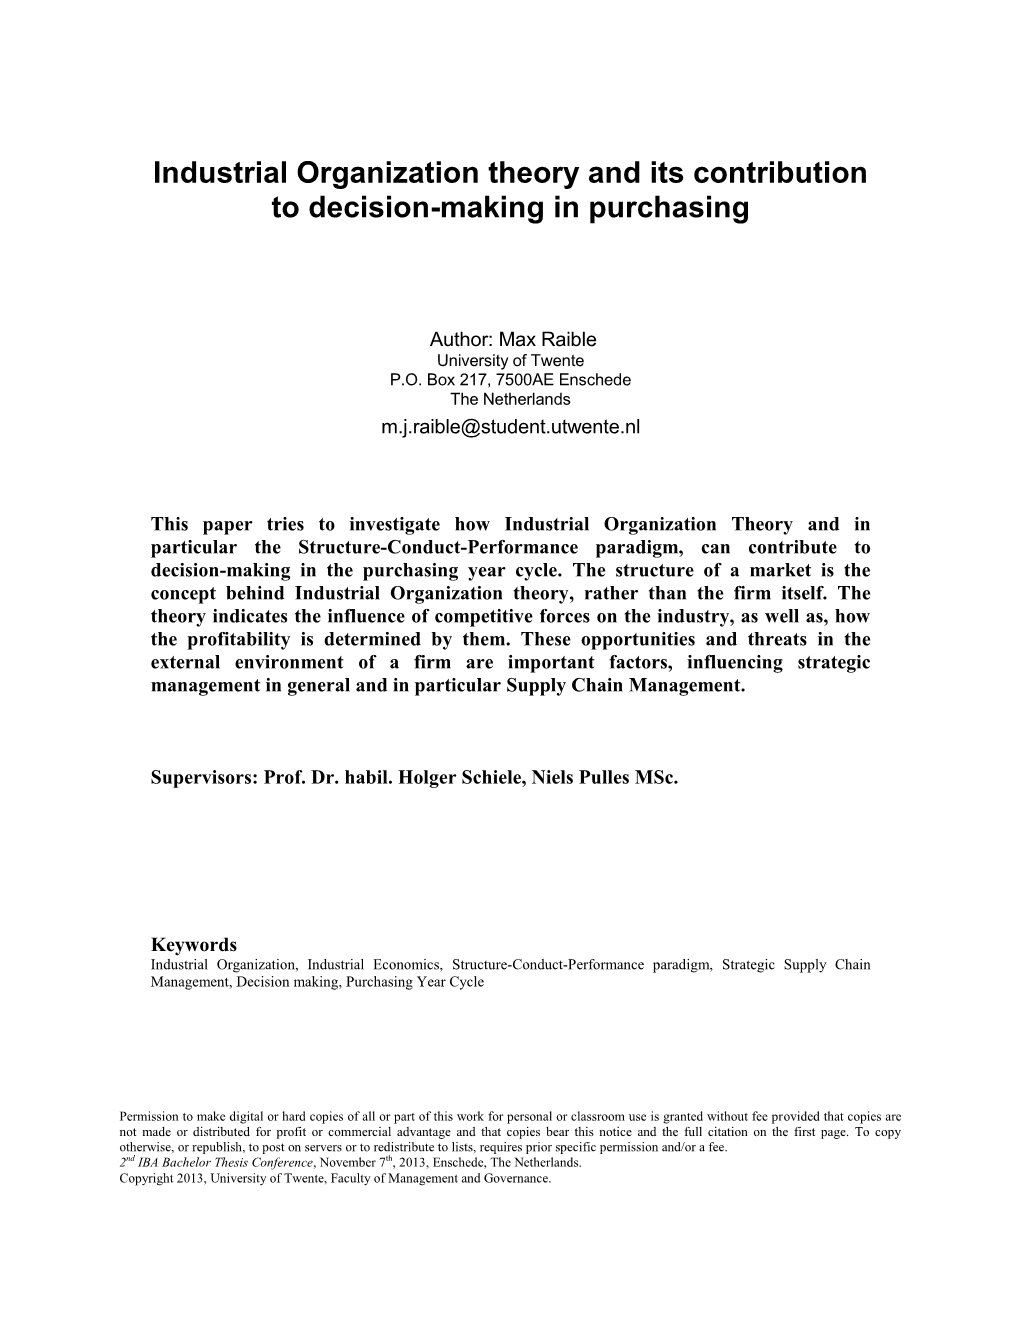 Industrial Organization Theory and Its Contribution to Decision-Making in Purchasing